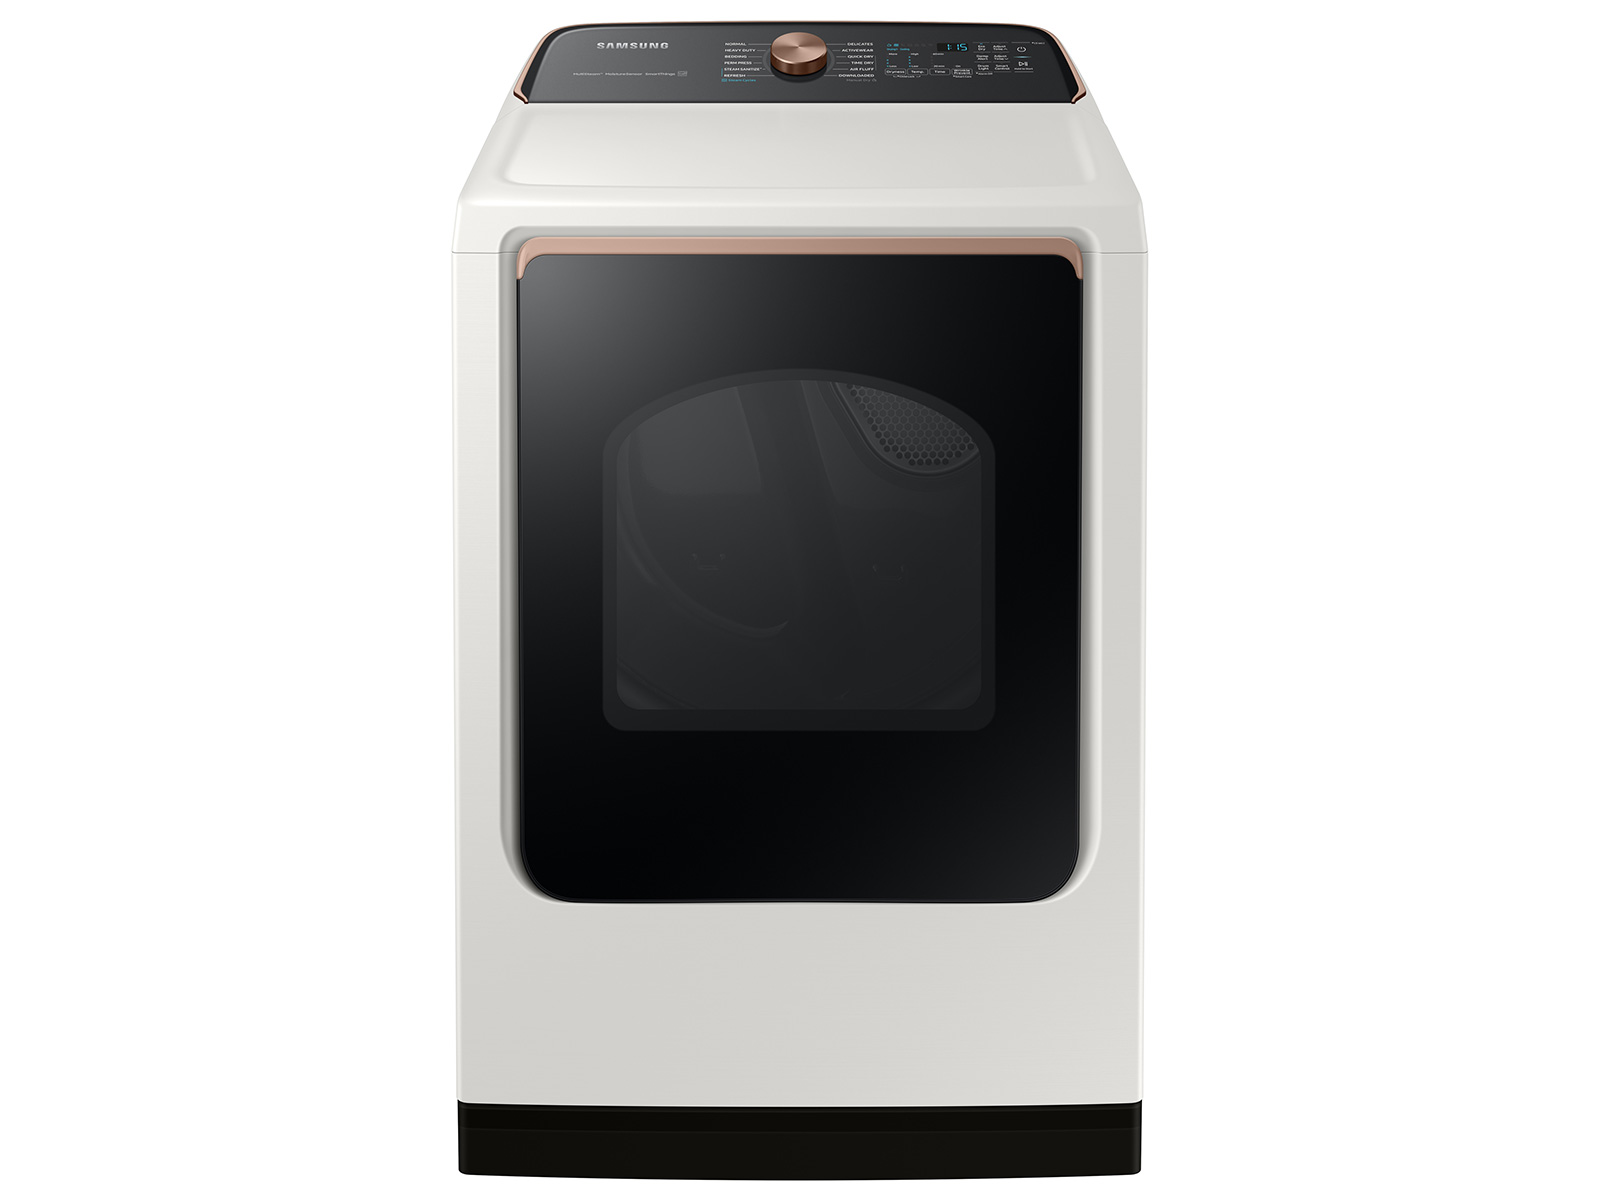 Photos - Tumble Dryer Samsung 7.4 cu. ft. Smart Gas Dryer with Steam Sanitize+ in Ivory(DVG55A73 